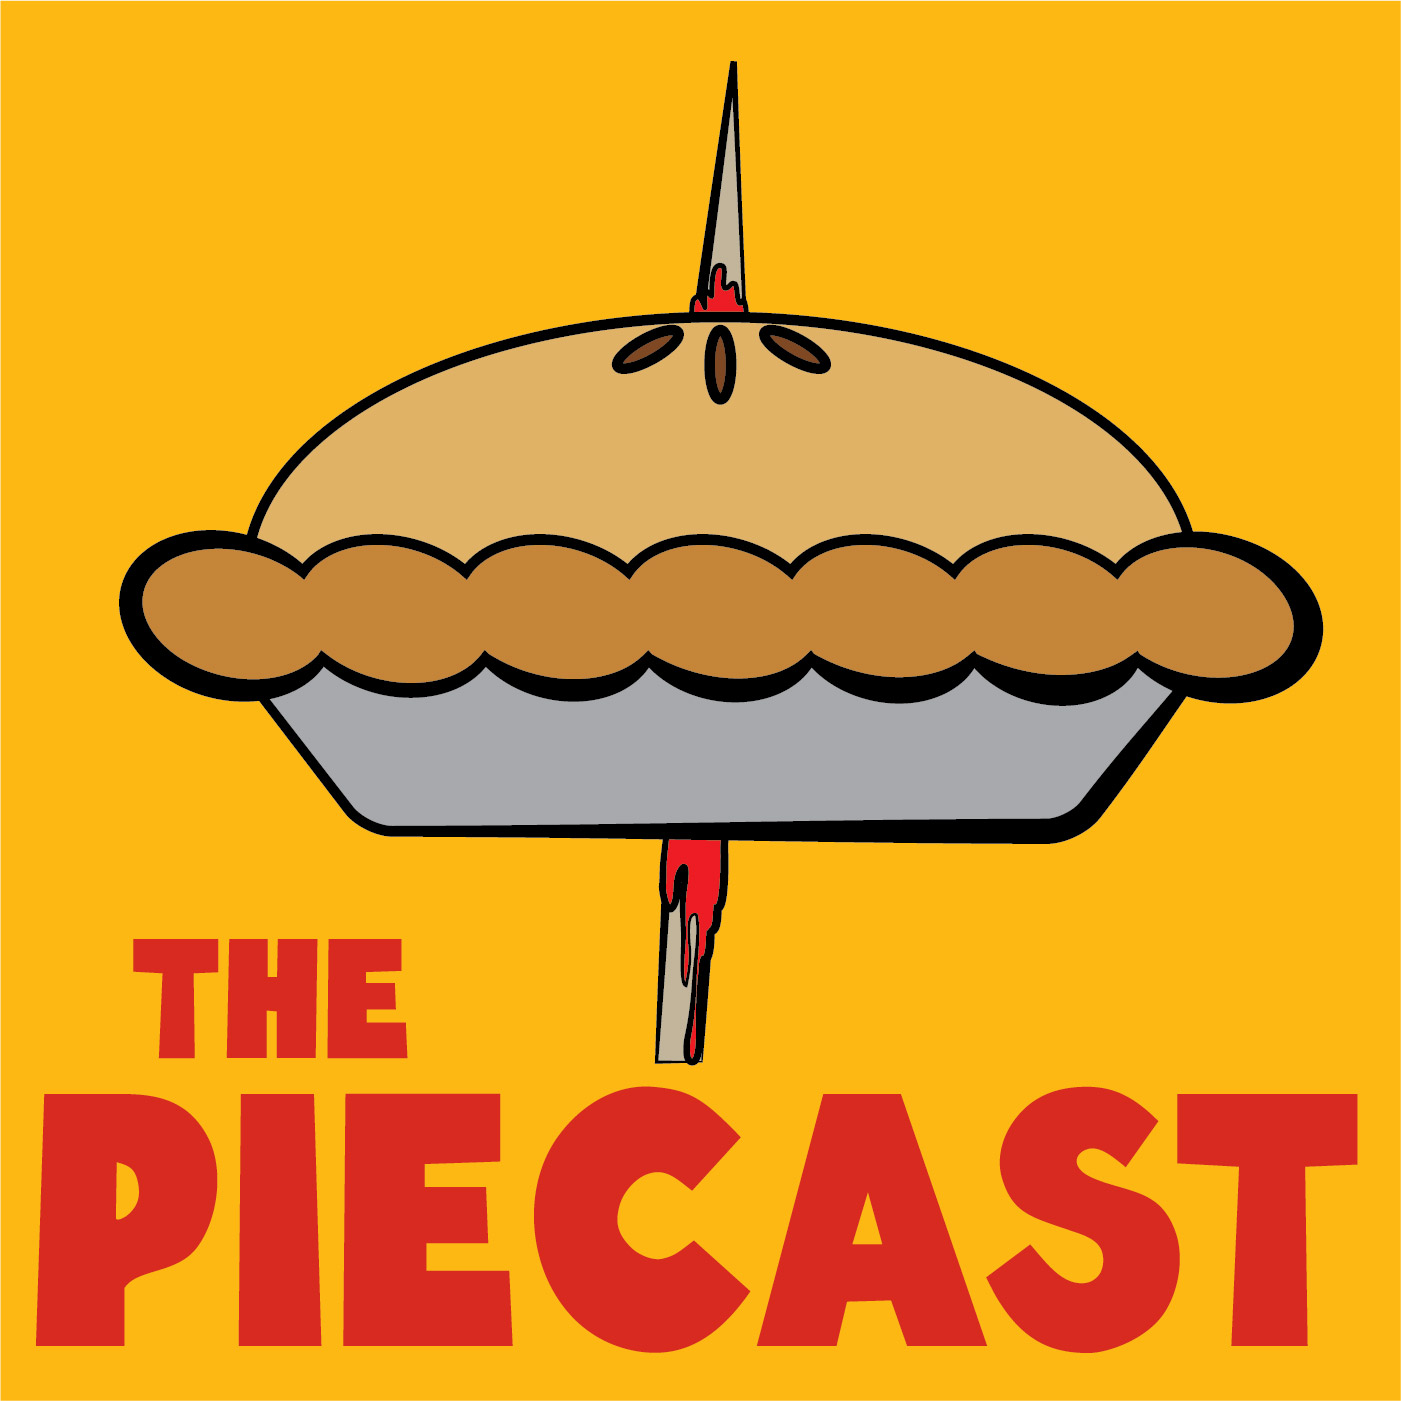 FireandLunch Piecast Episode 64 - S7E03: The Queen’s Justice